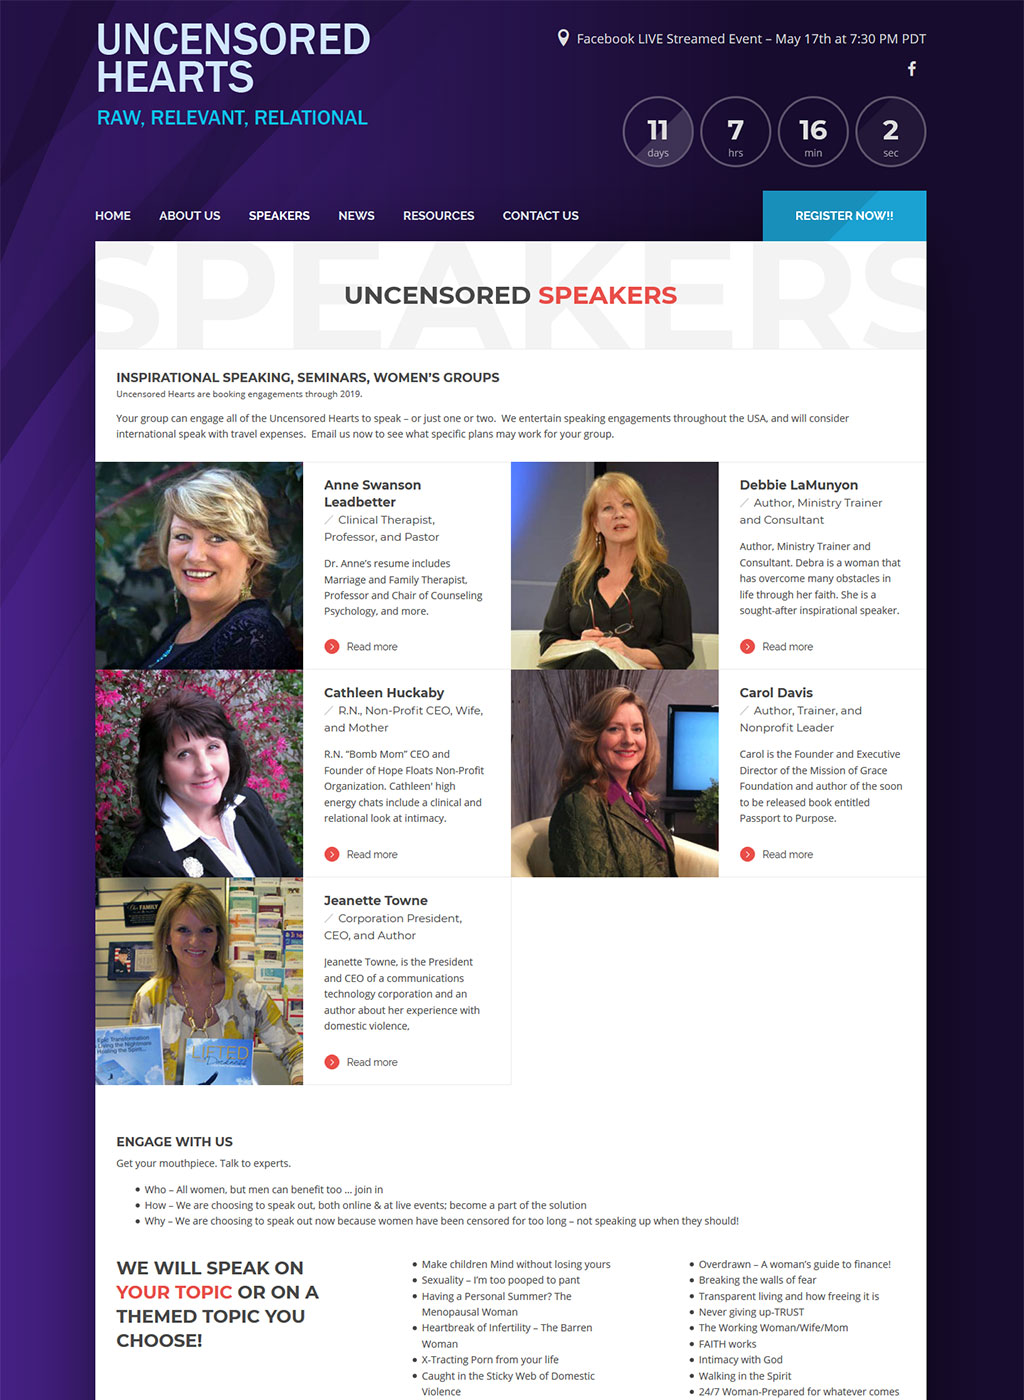 Overview page of the Christian women event speakers